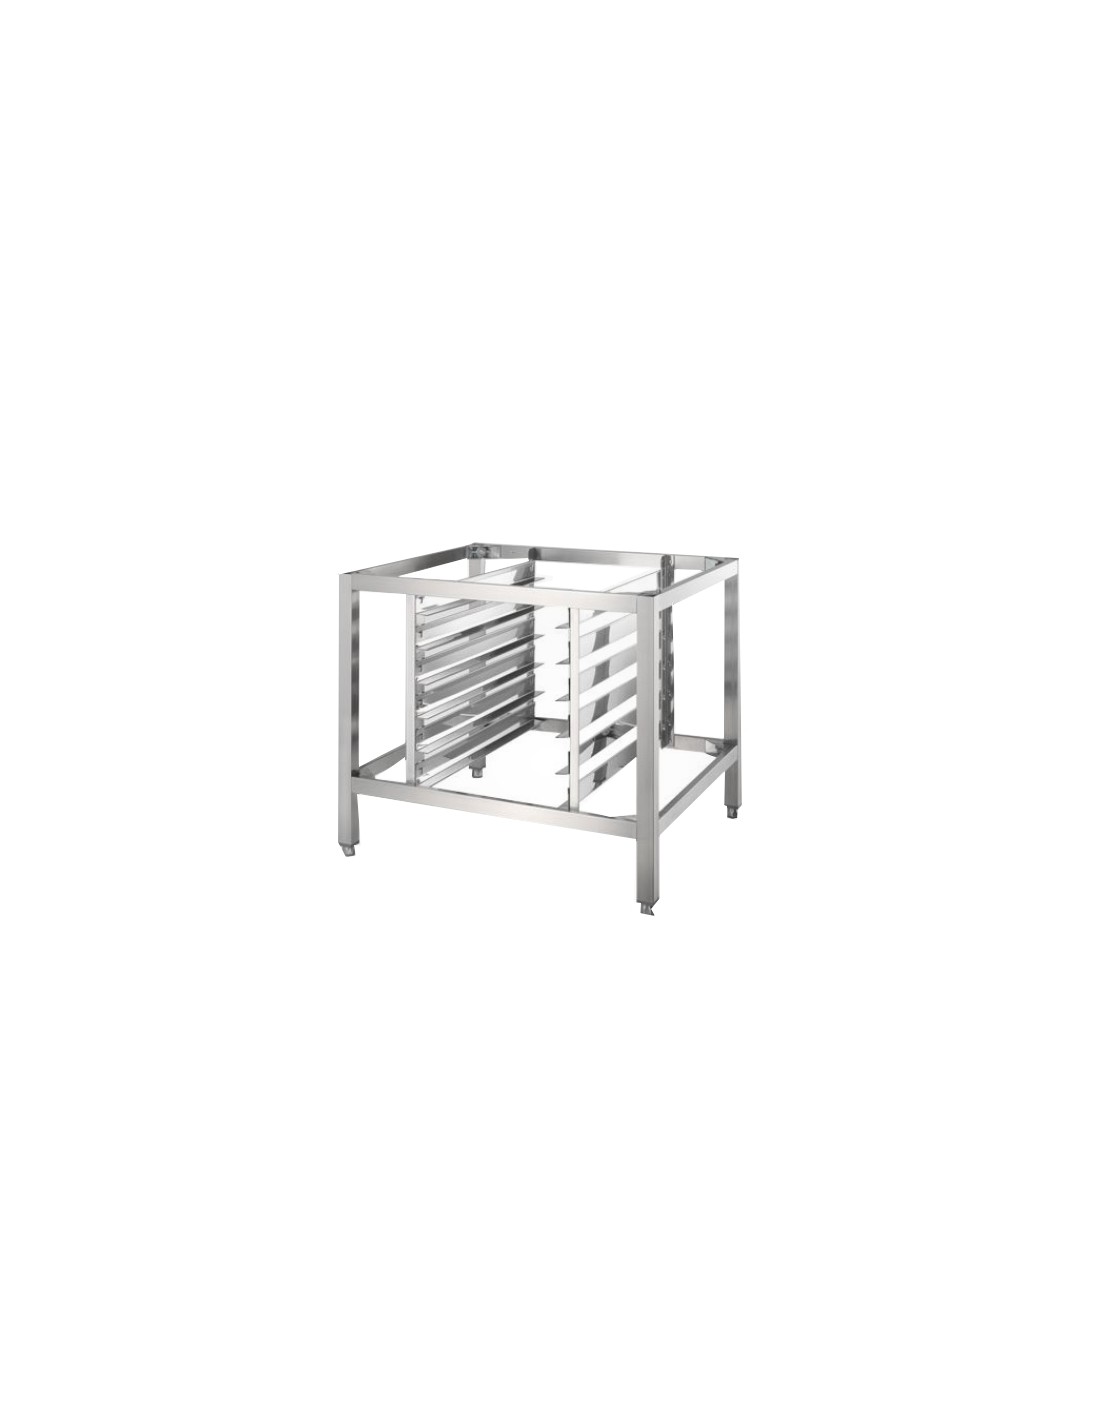 Stainless steel support with Gourmet Slim h61 - 5 shelves